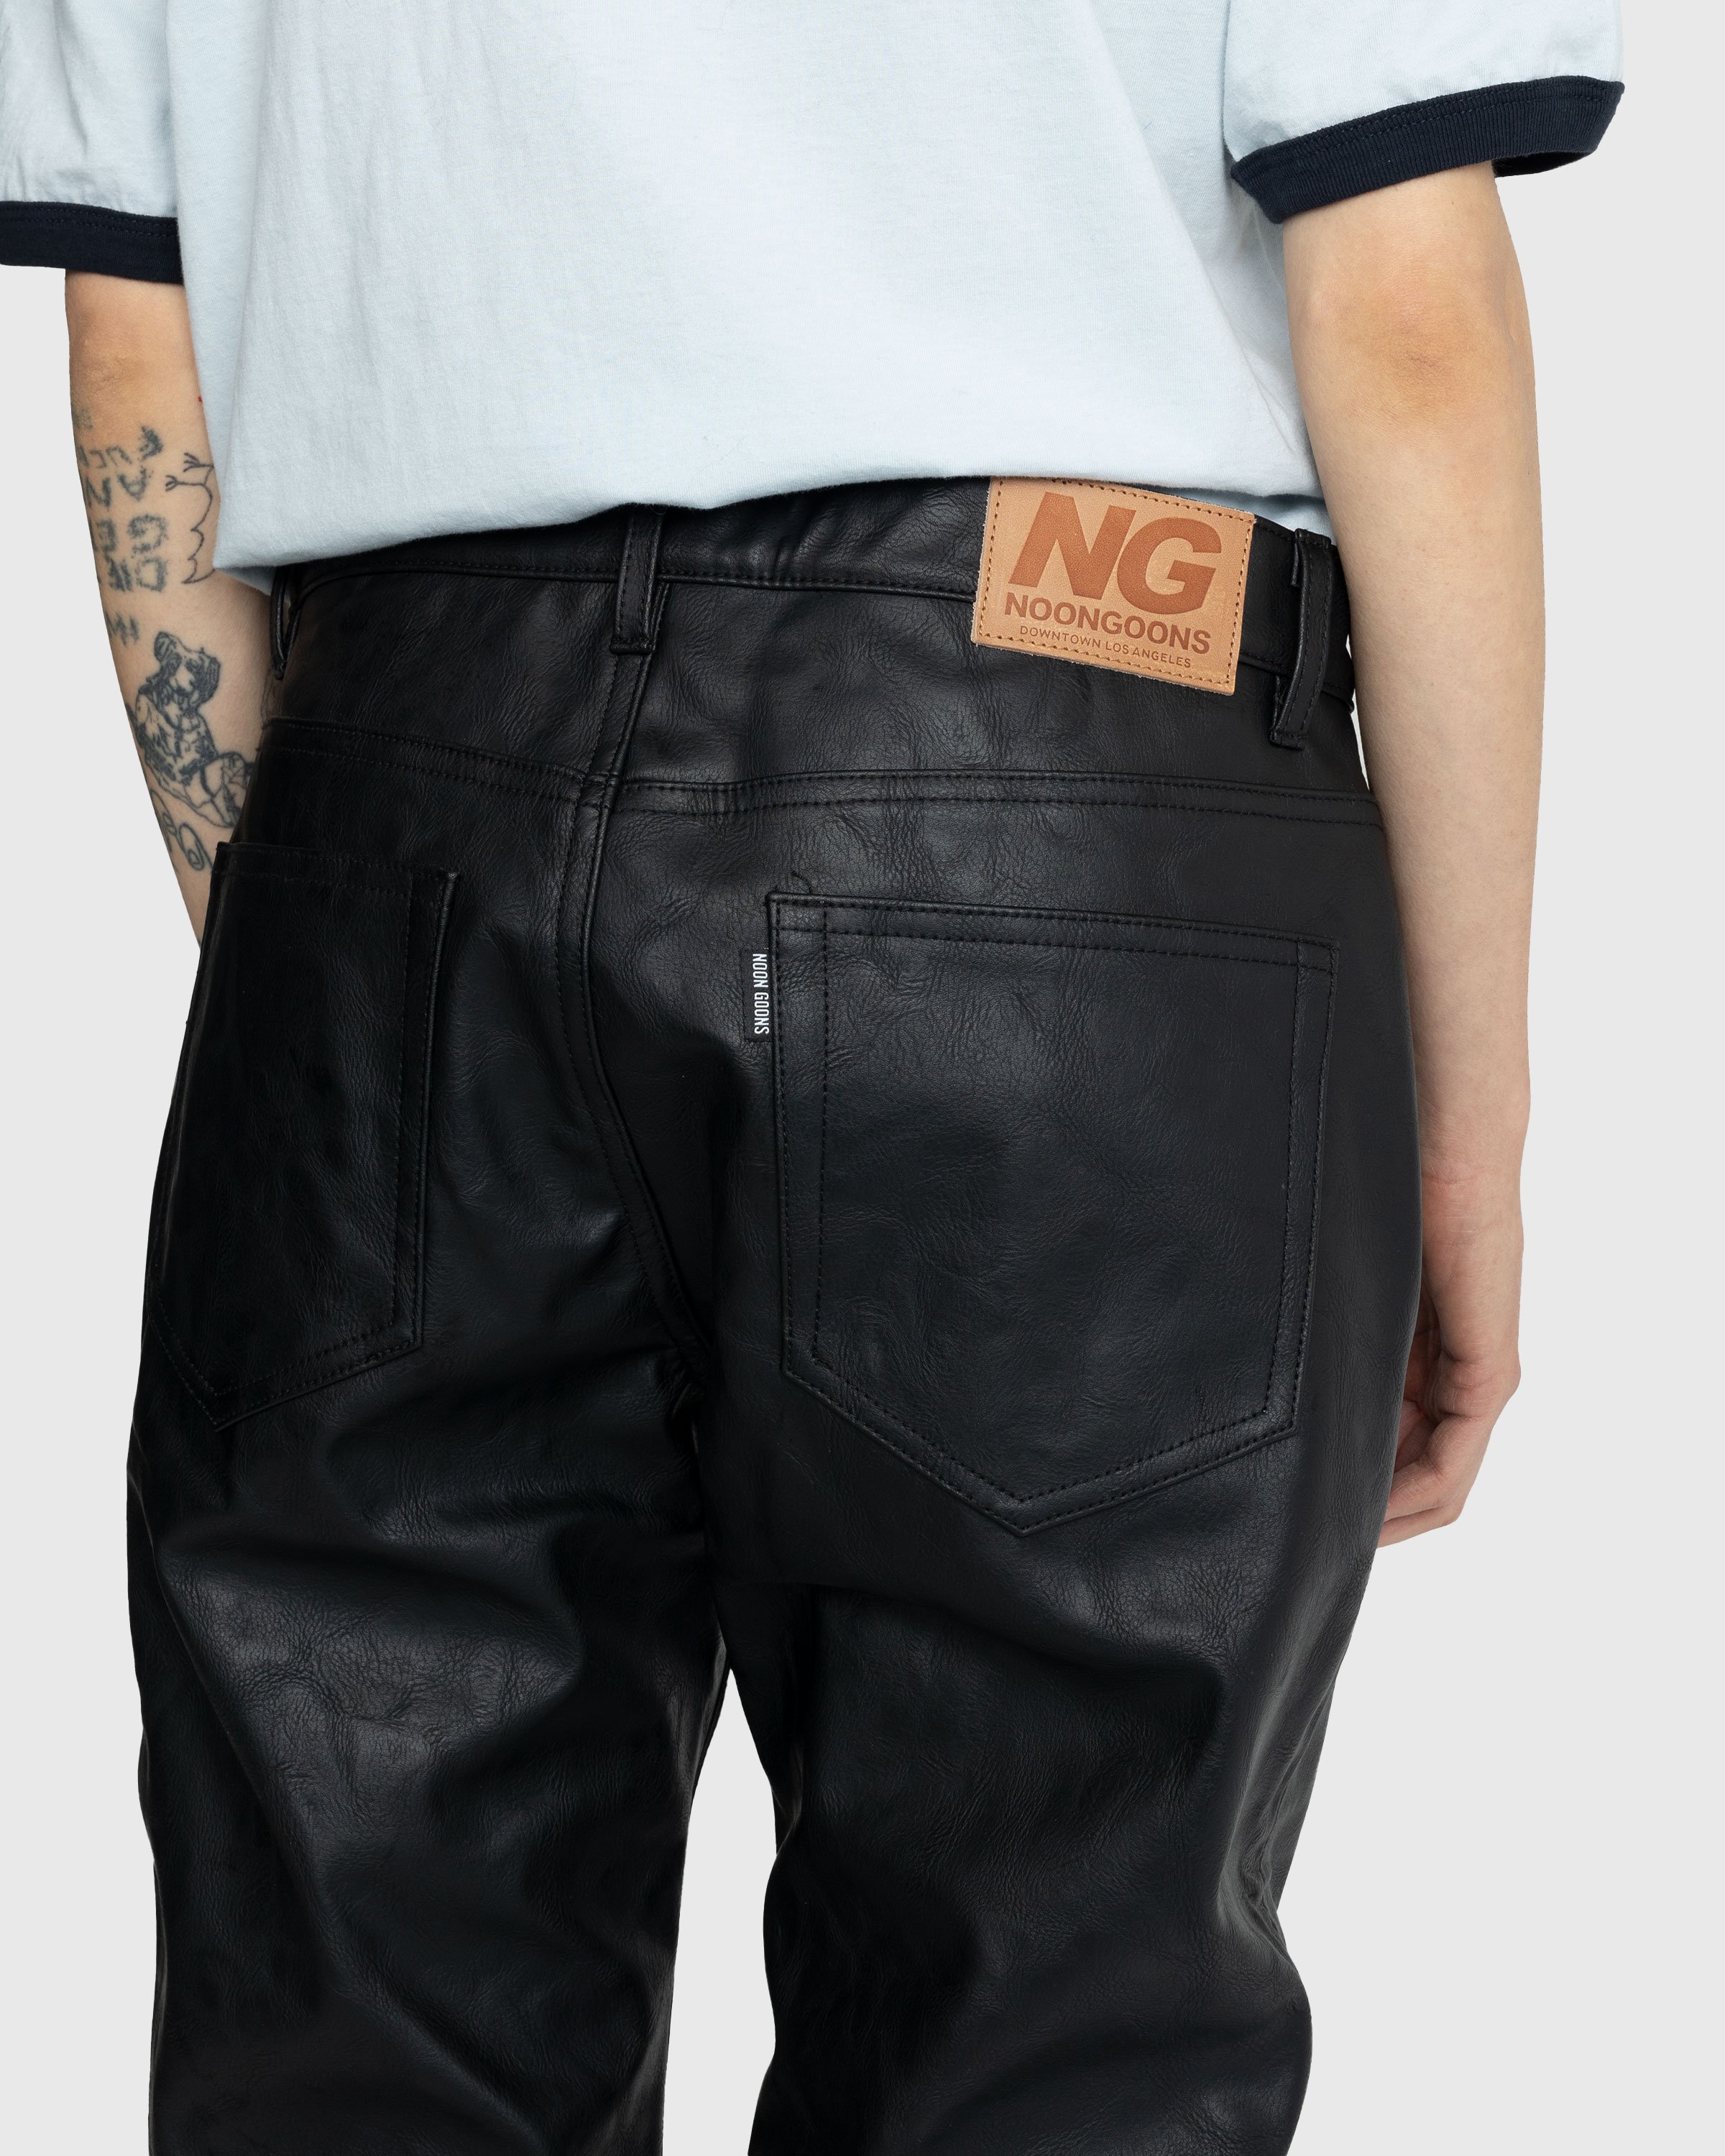 Noon Goons - GP Faux Leather Pant Black - Clothing - Black - Image 6